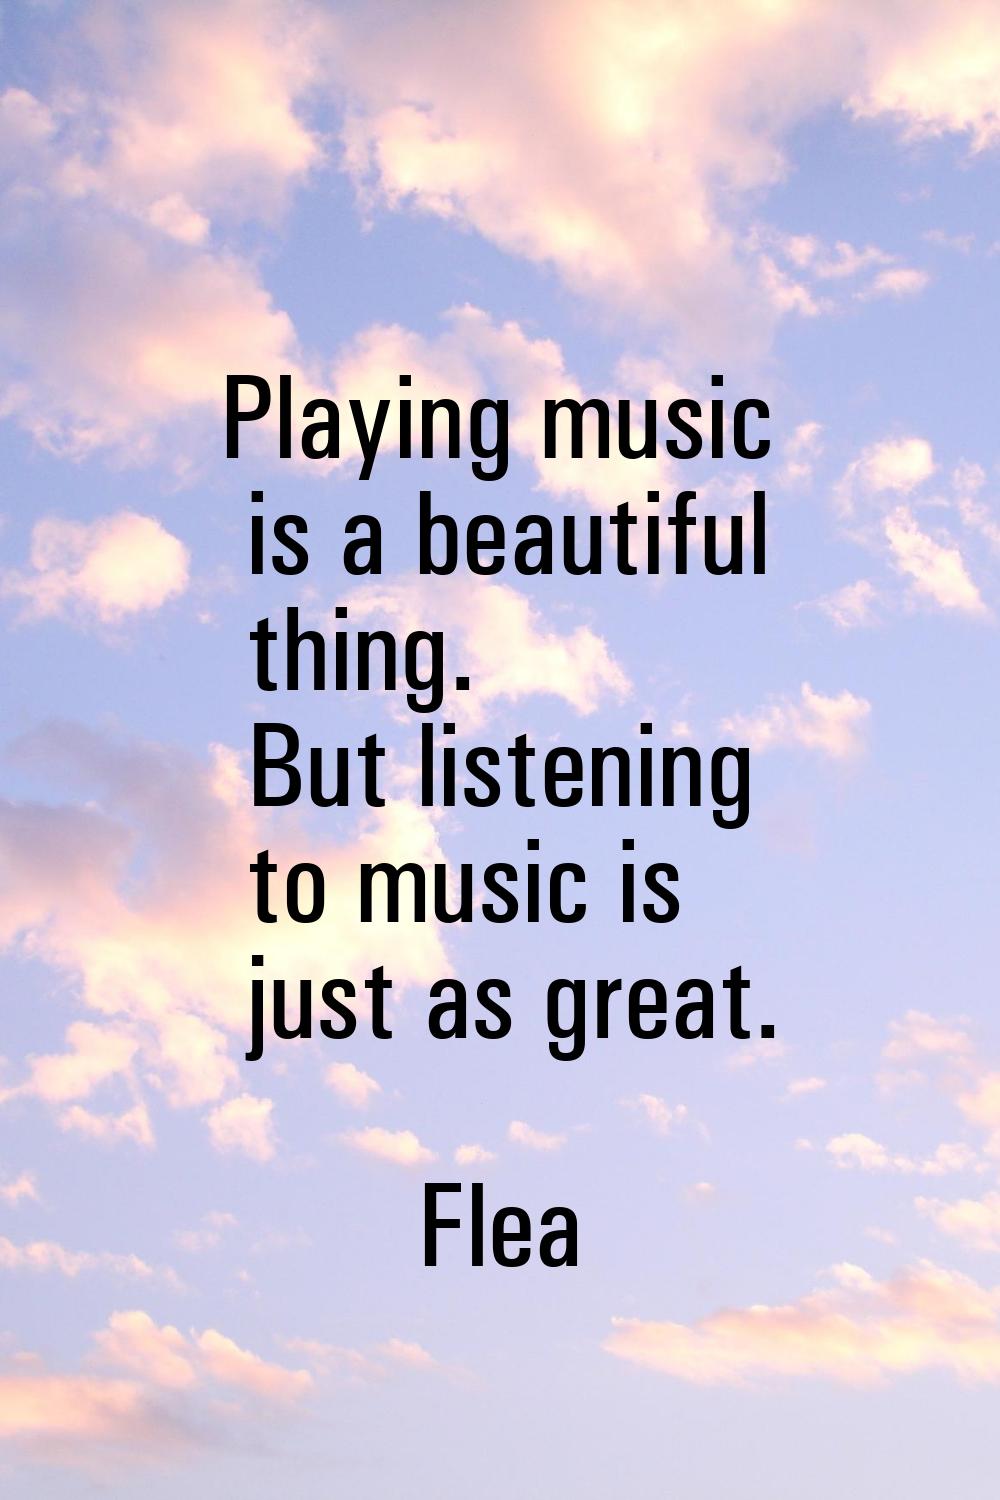 Playing music is a beautiful thing. But listening to music is just as great.